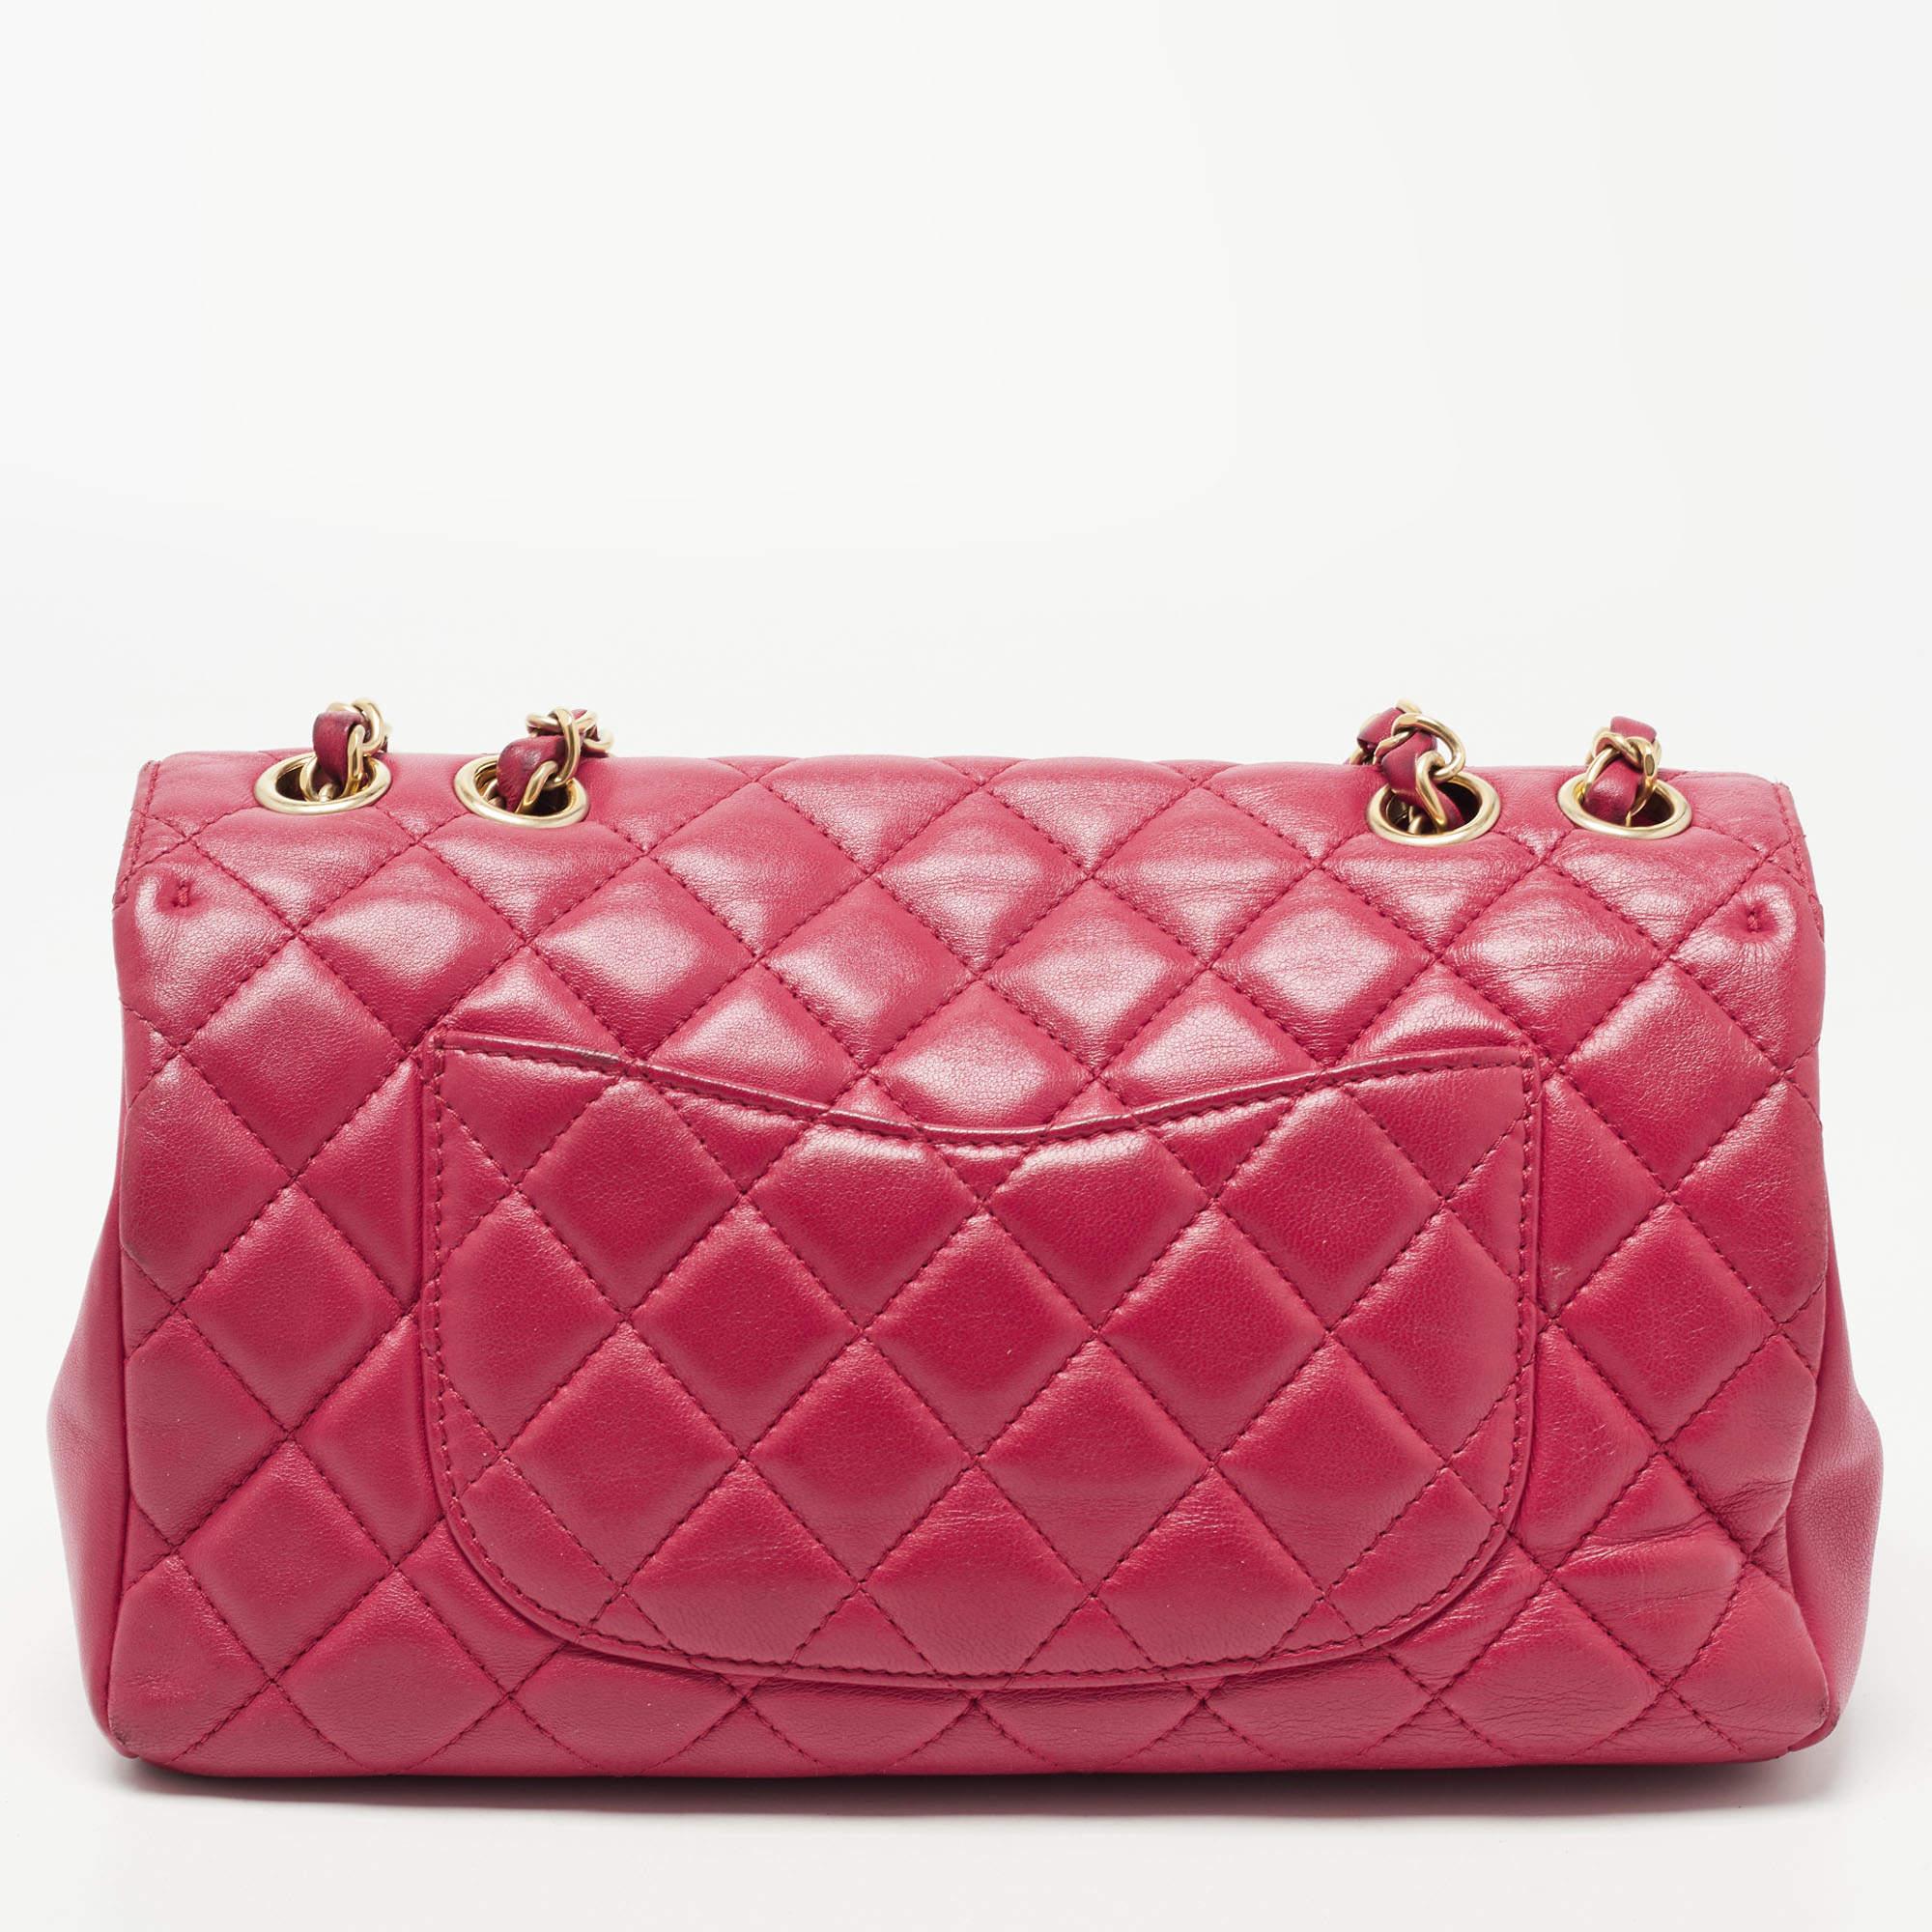 Every creation of Chanel maintains the legacy of the brand with its brilliant craftsmanship and artistic designs. This Mademoiselle Chic bag in red comes exquisitely created from leather and embodies an alluring appeal.

